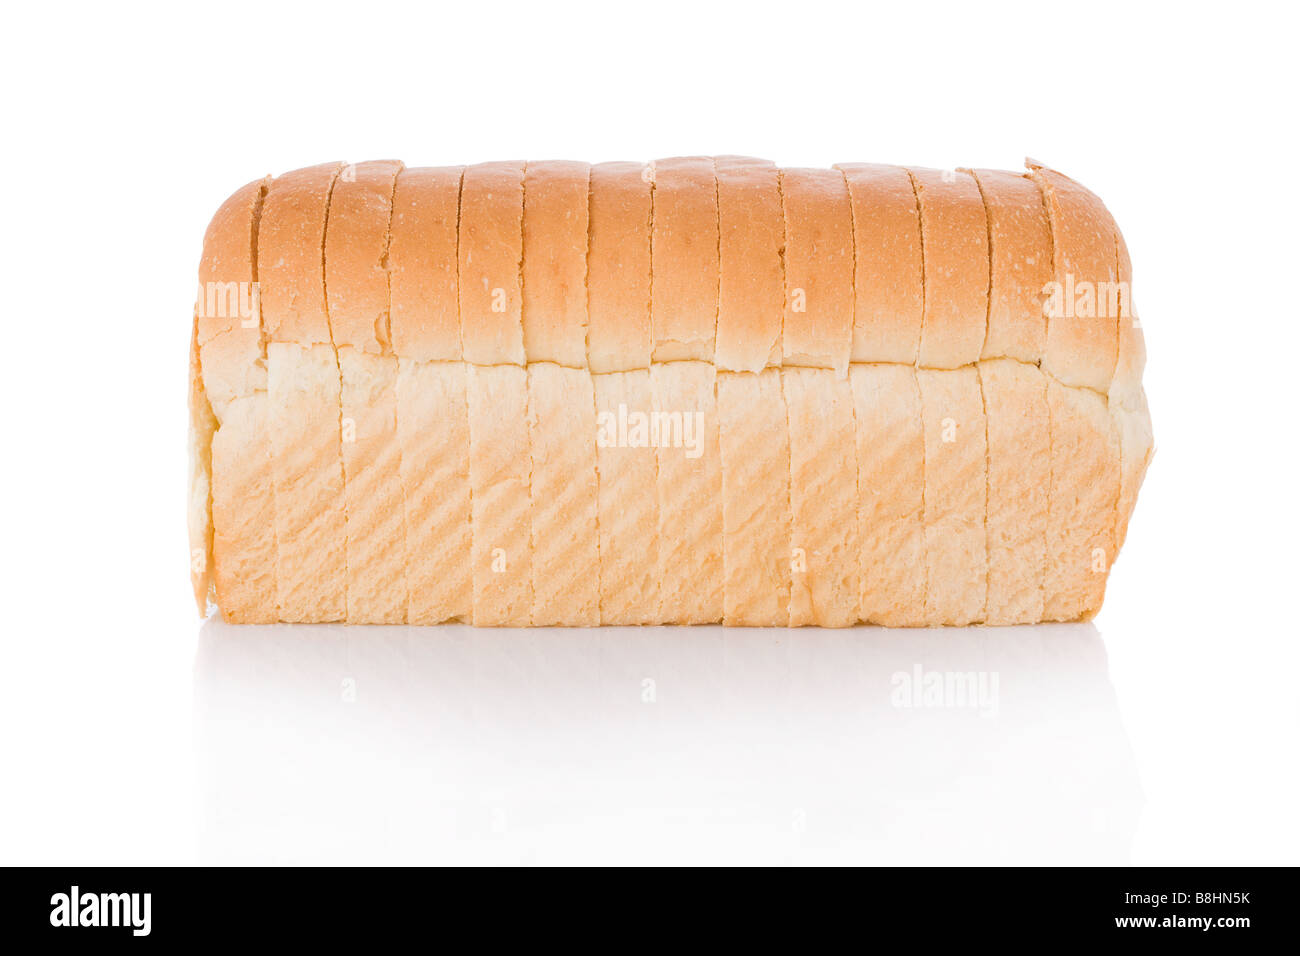 Sliced loaf of bread isolated on white background Stock Photo